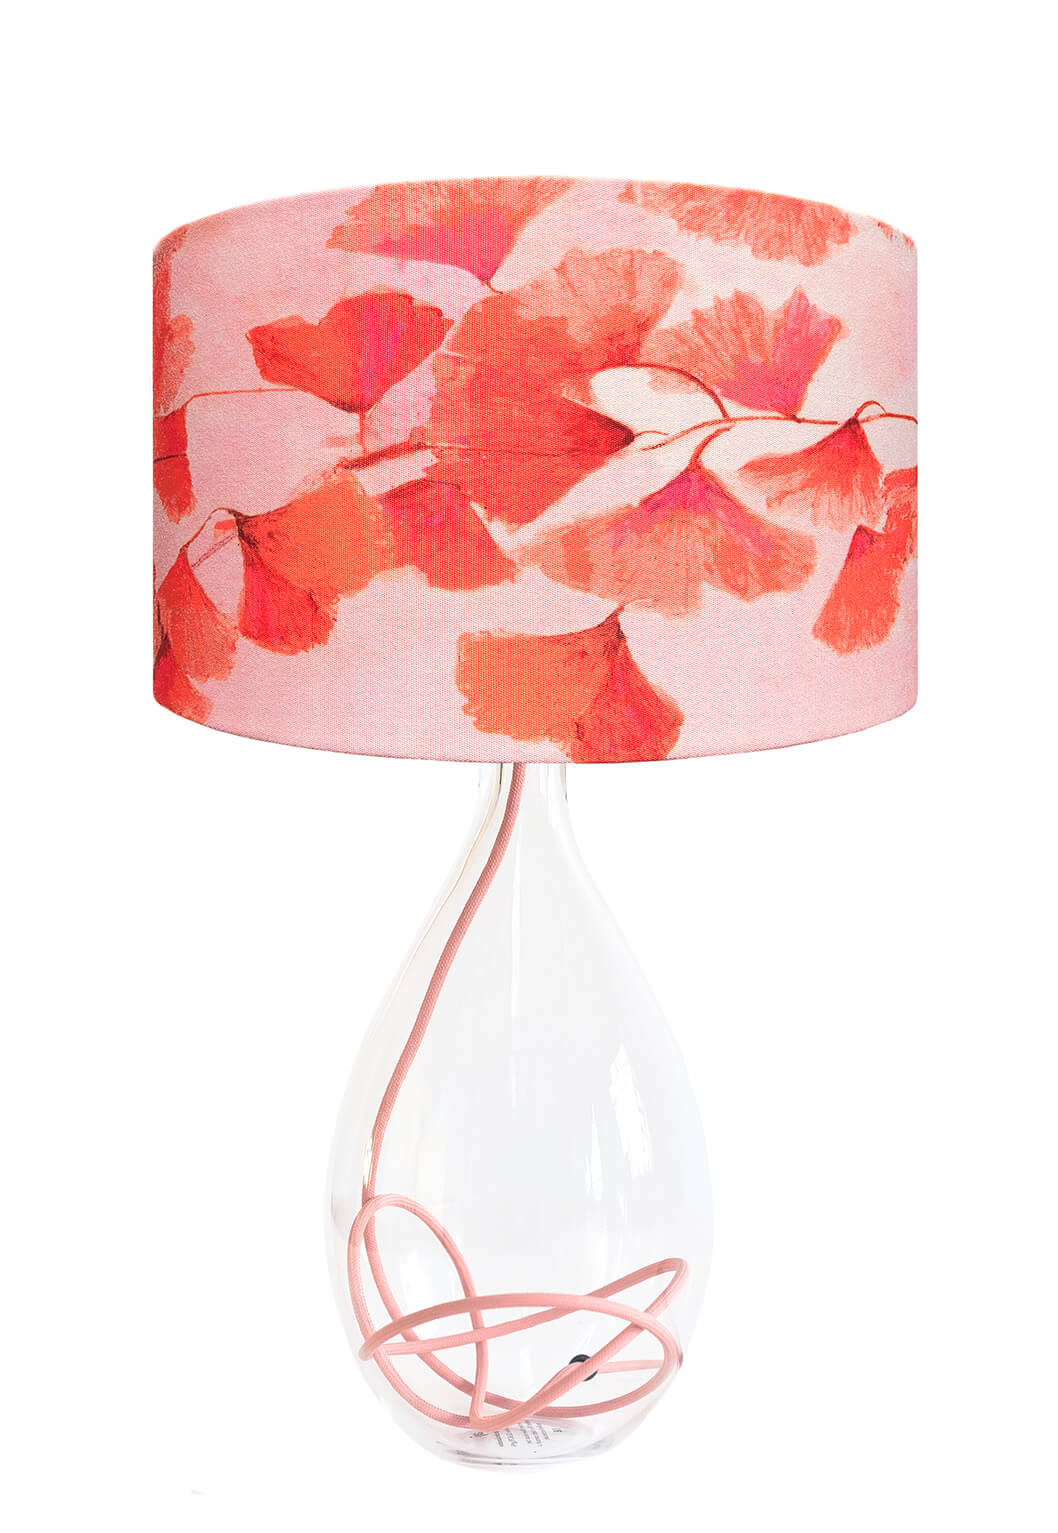 Ginkgo in Coral lamp on Rose flex glass lamp base designed by Anna Jacobs